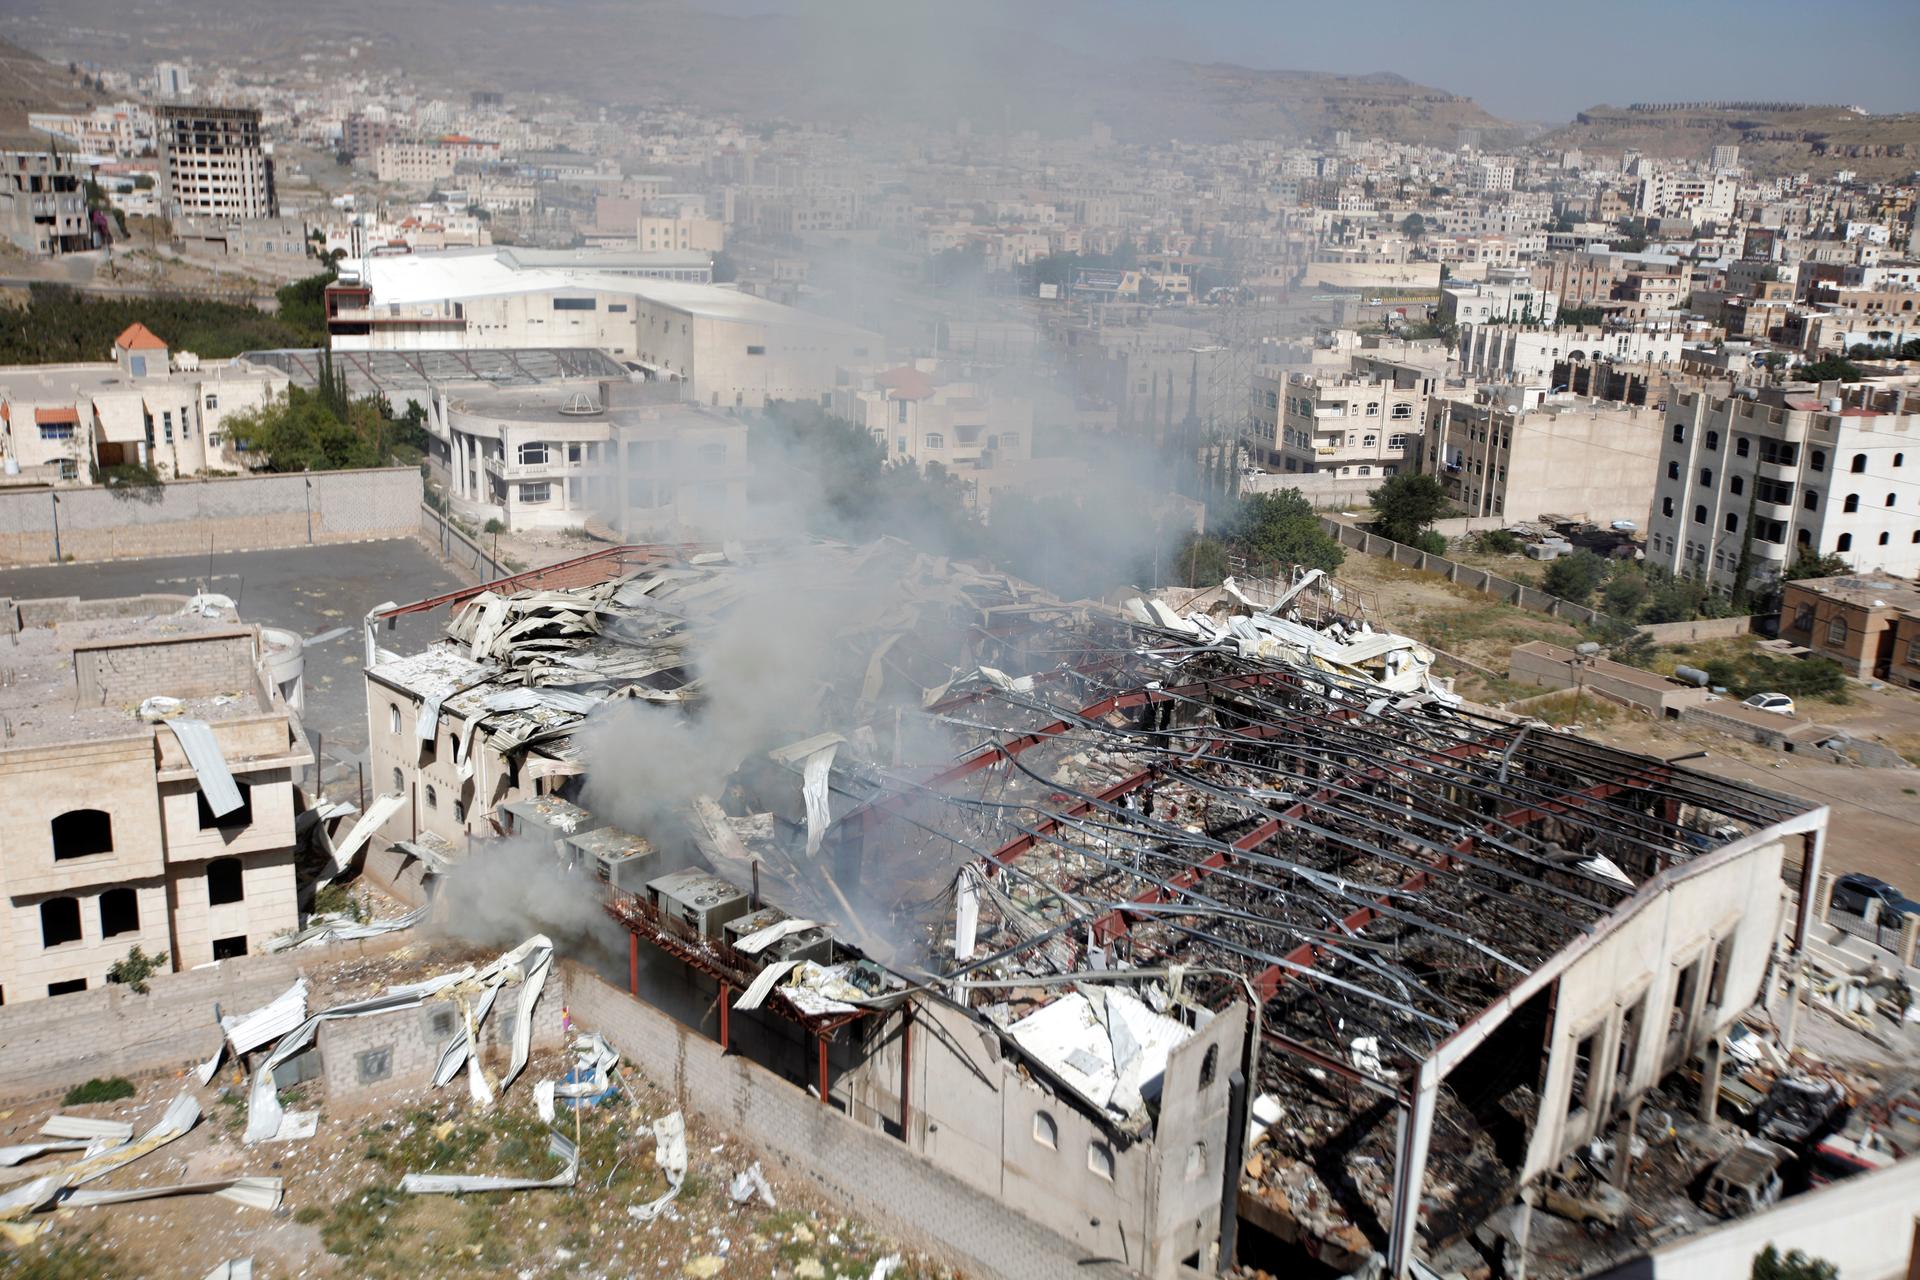 This is a view of the community hall where Saudi-led warplanes struck a funeral in Sanaa, the capital of Yemen.